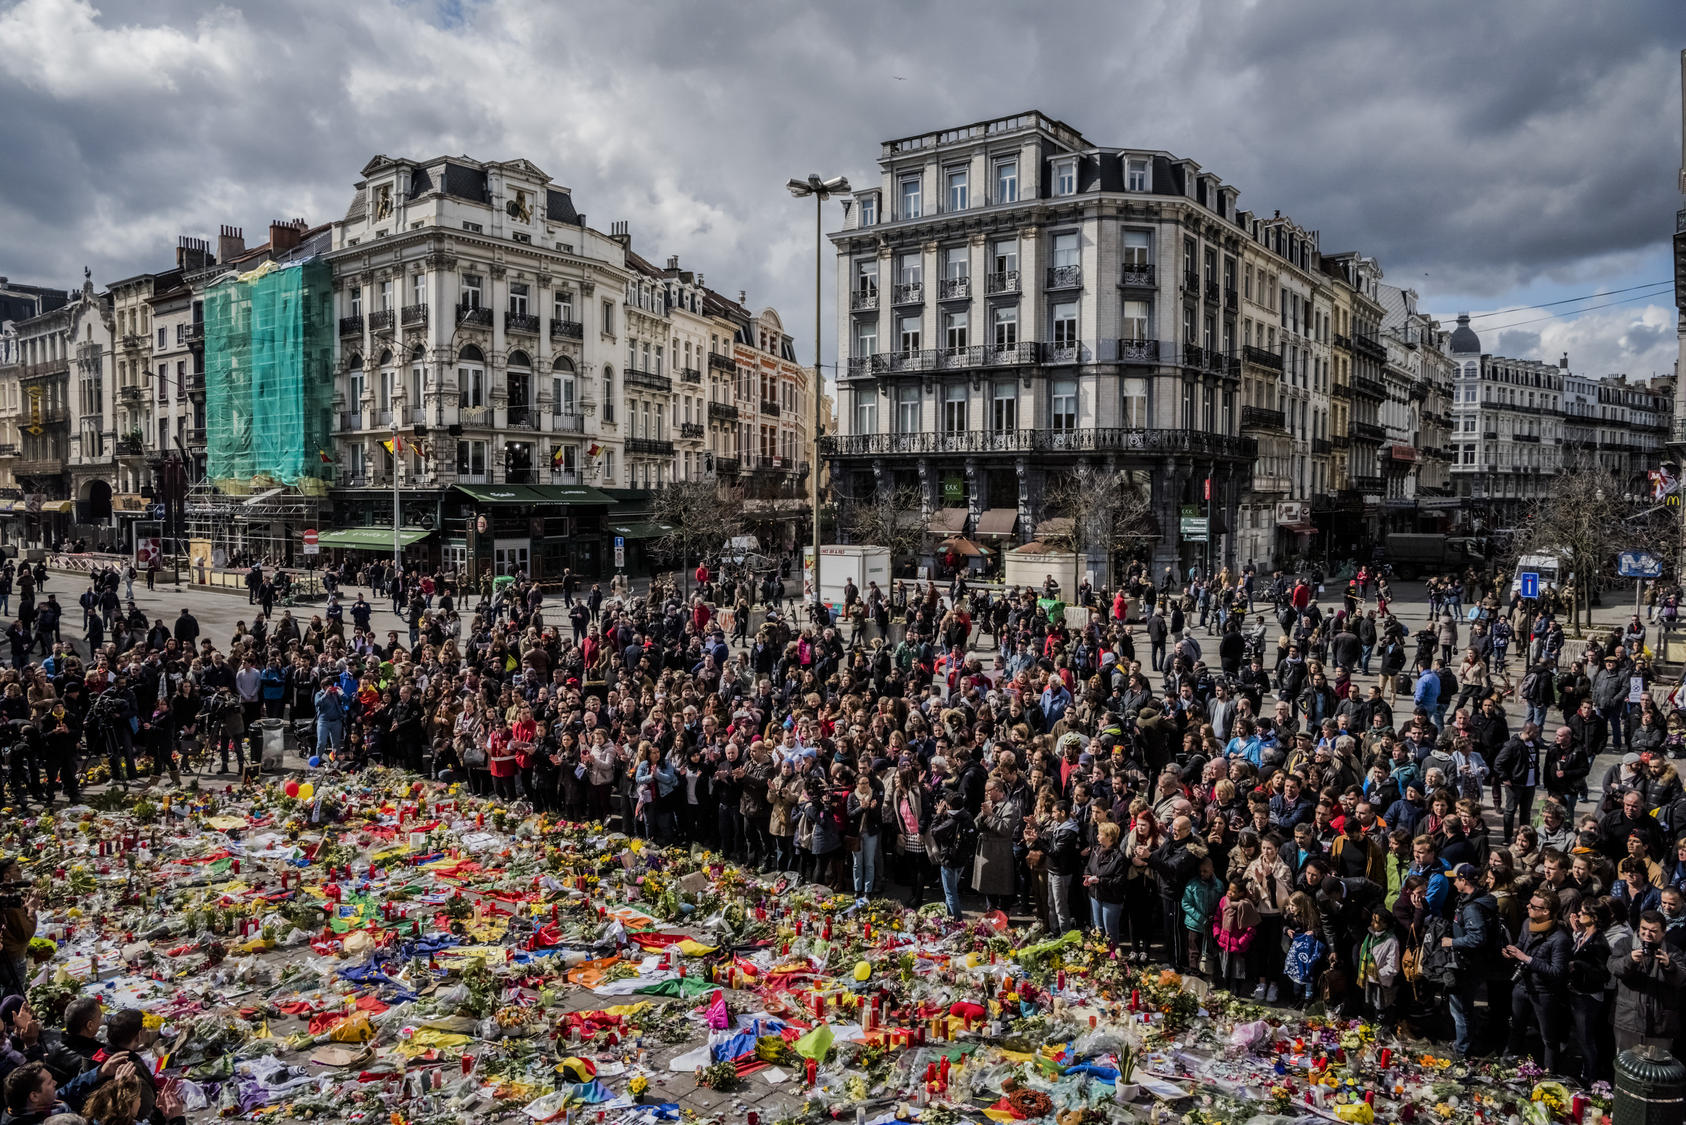 People gather around a makeshift memorial for victims of Tuesday's attacks, during a peace rally in Brussels, March 27, 2016